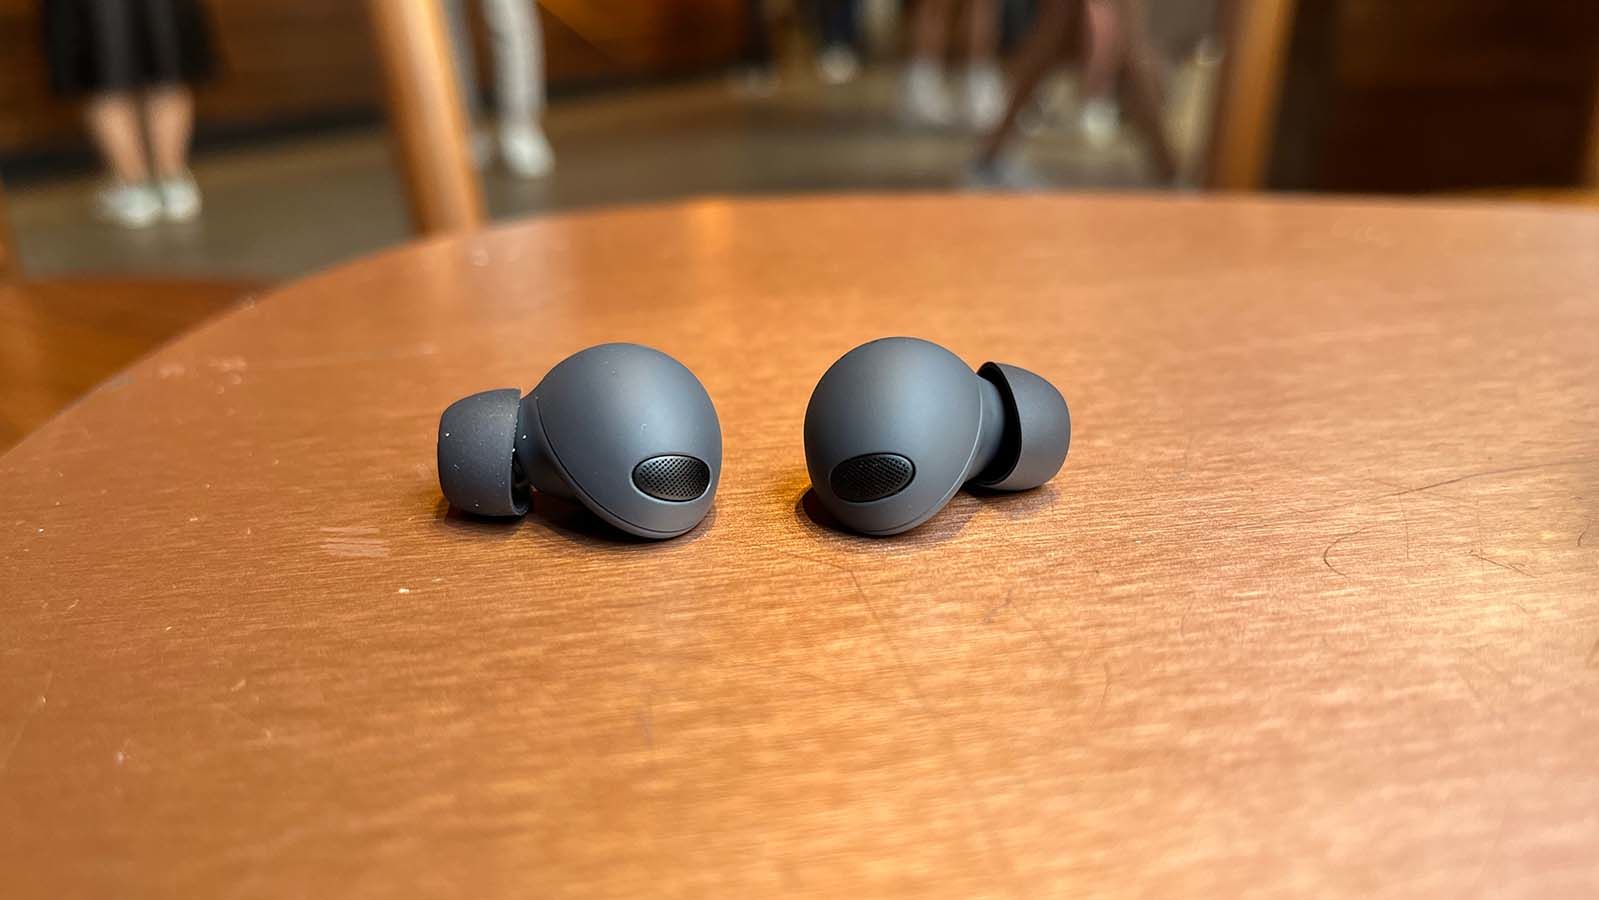 Samsung Galaxy Buds 2 Pro review: the best Samsung buds - The Verge